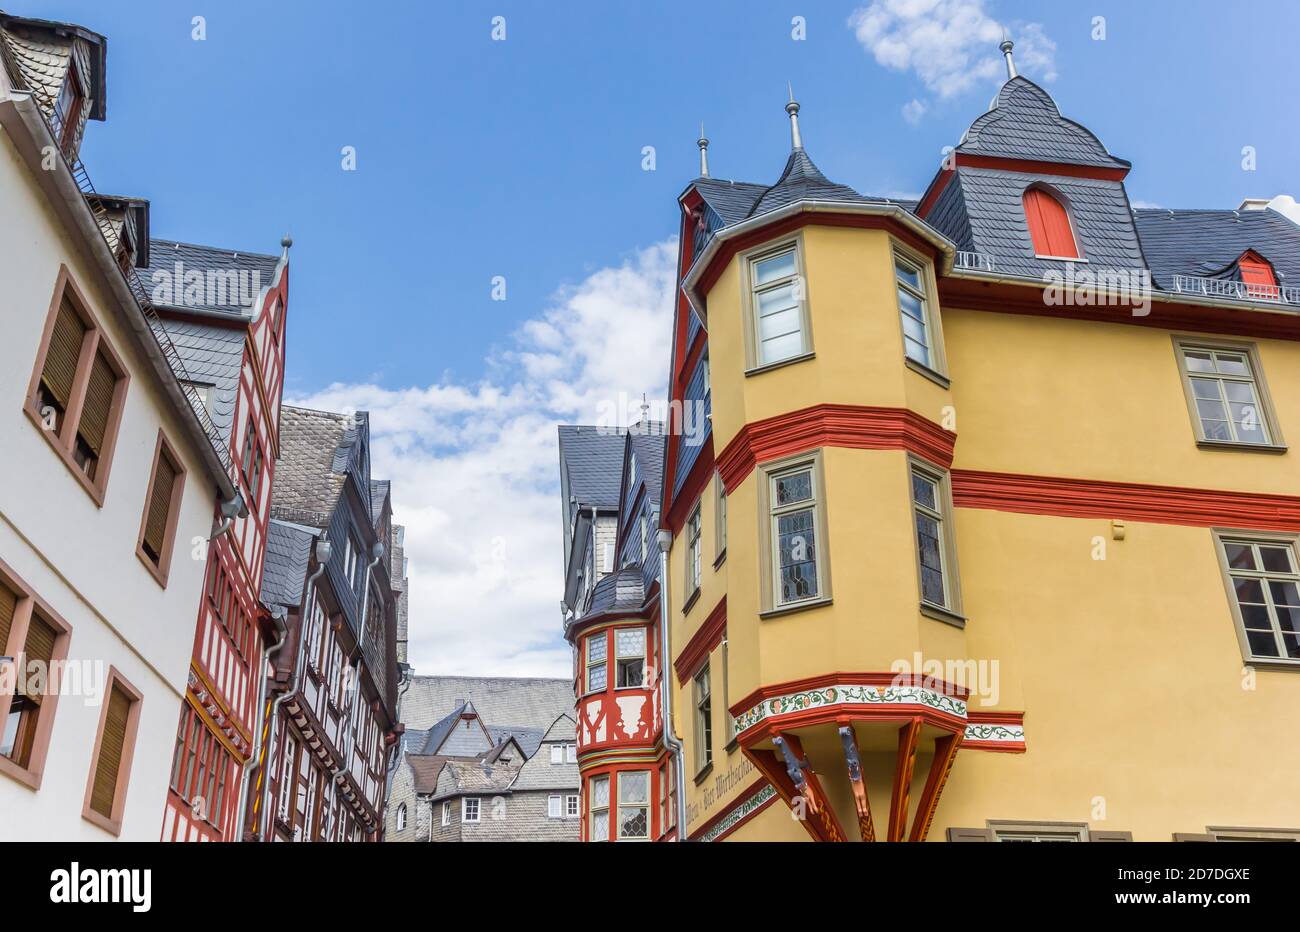 Colorful historic houses in Limburg an der Lahn, Germany Stock Photo